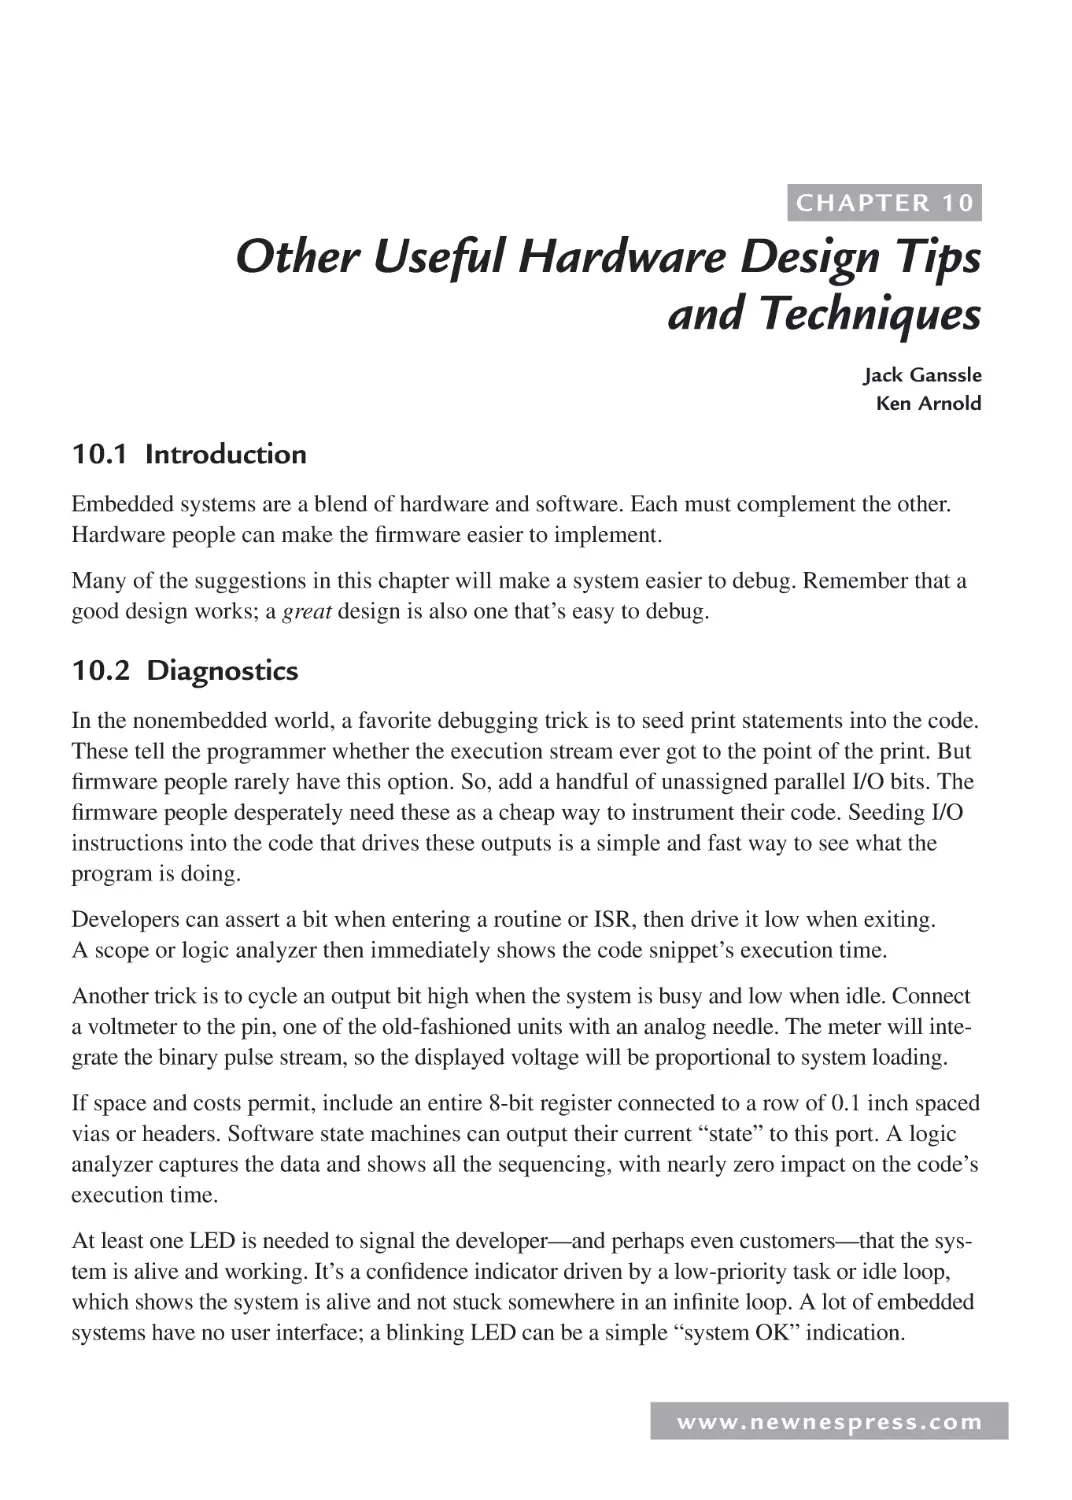 10 Other Useful Hardware Design Tips and Techniques
10.1 Introduction
10.2 Diagnostics